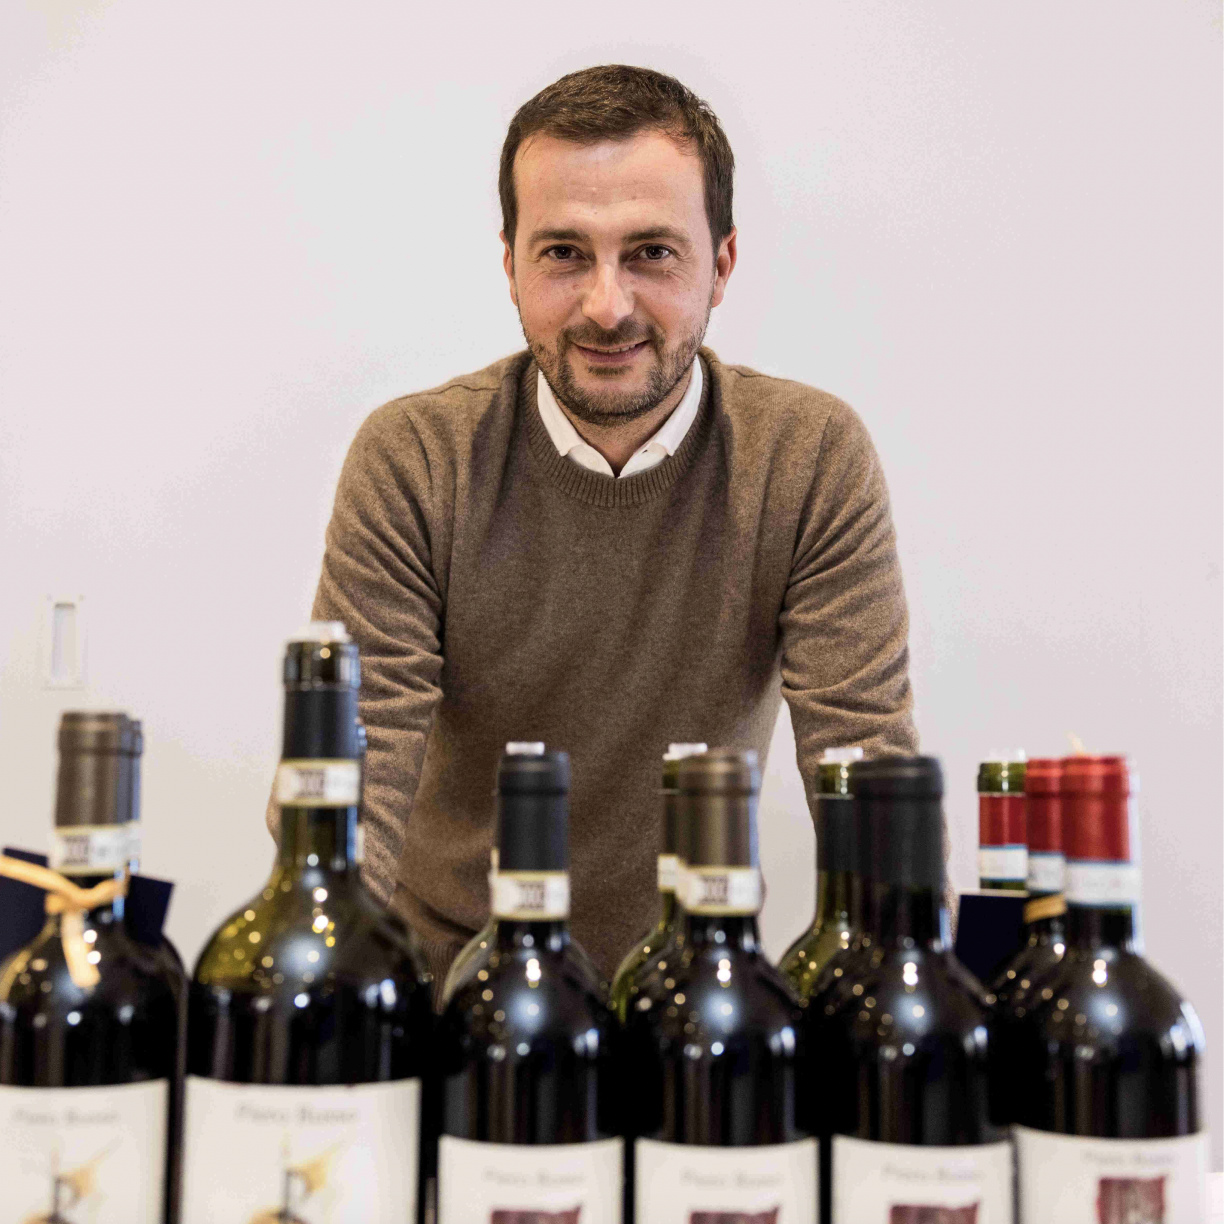 piero busso behind a row of wines